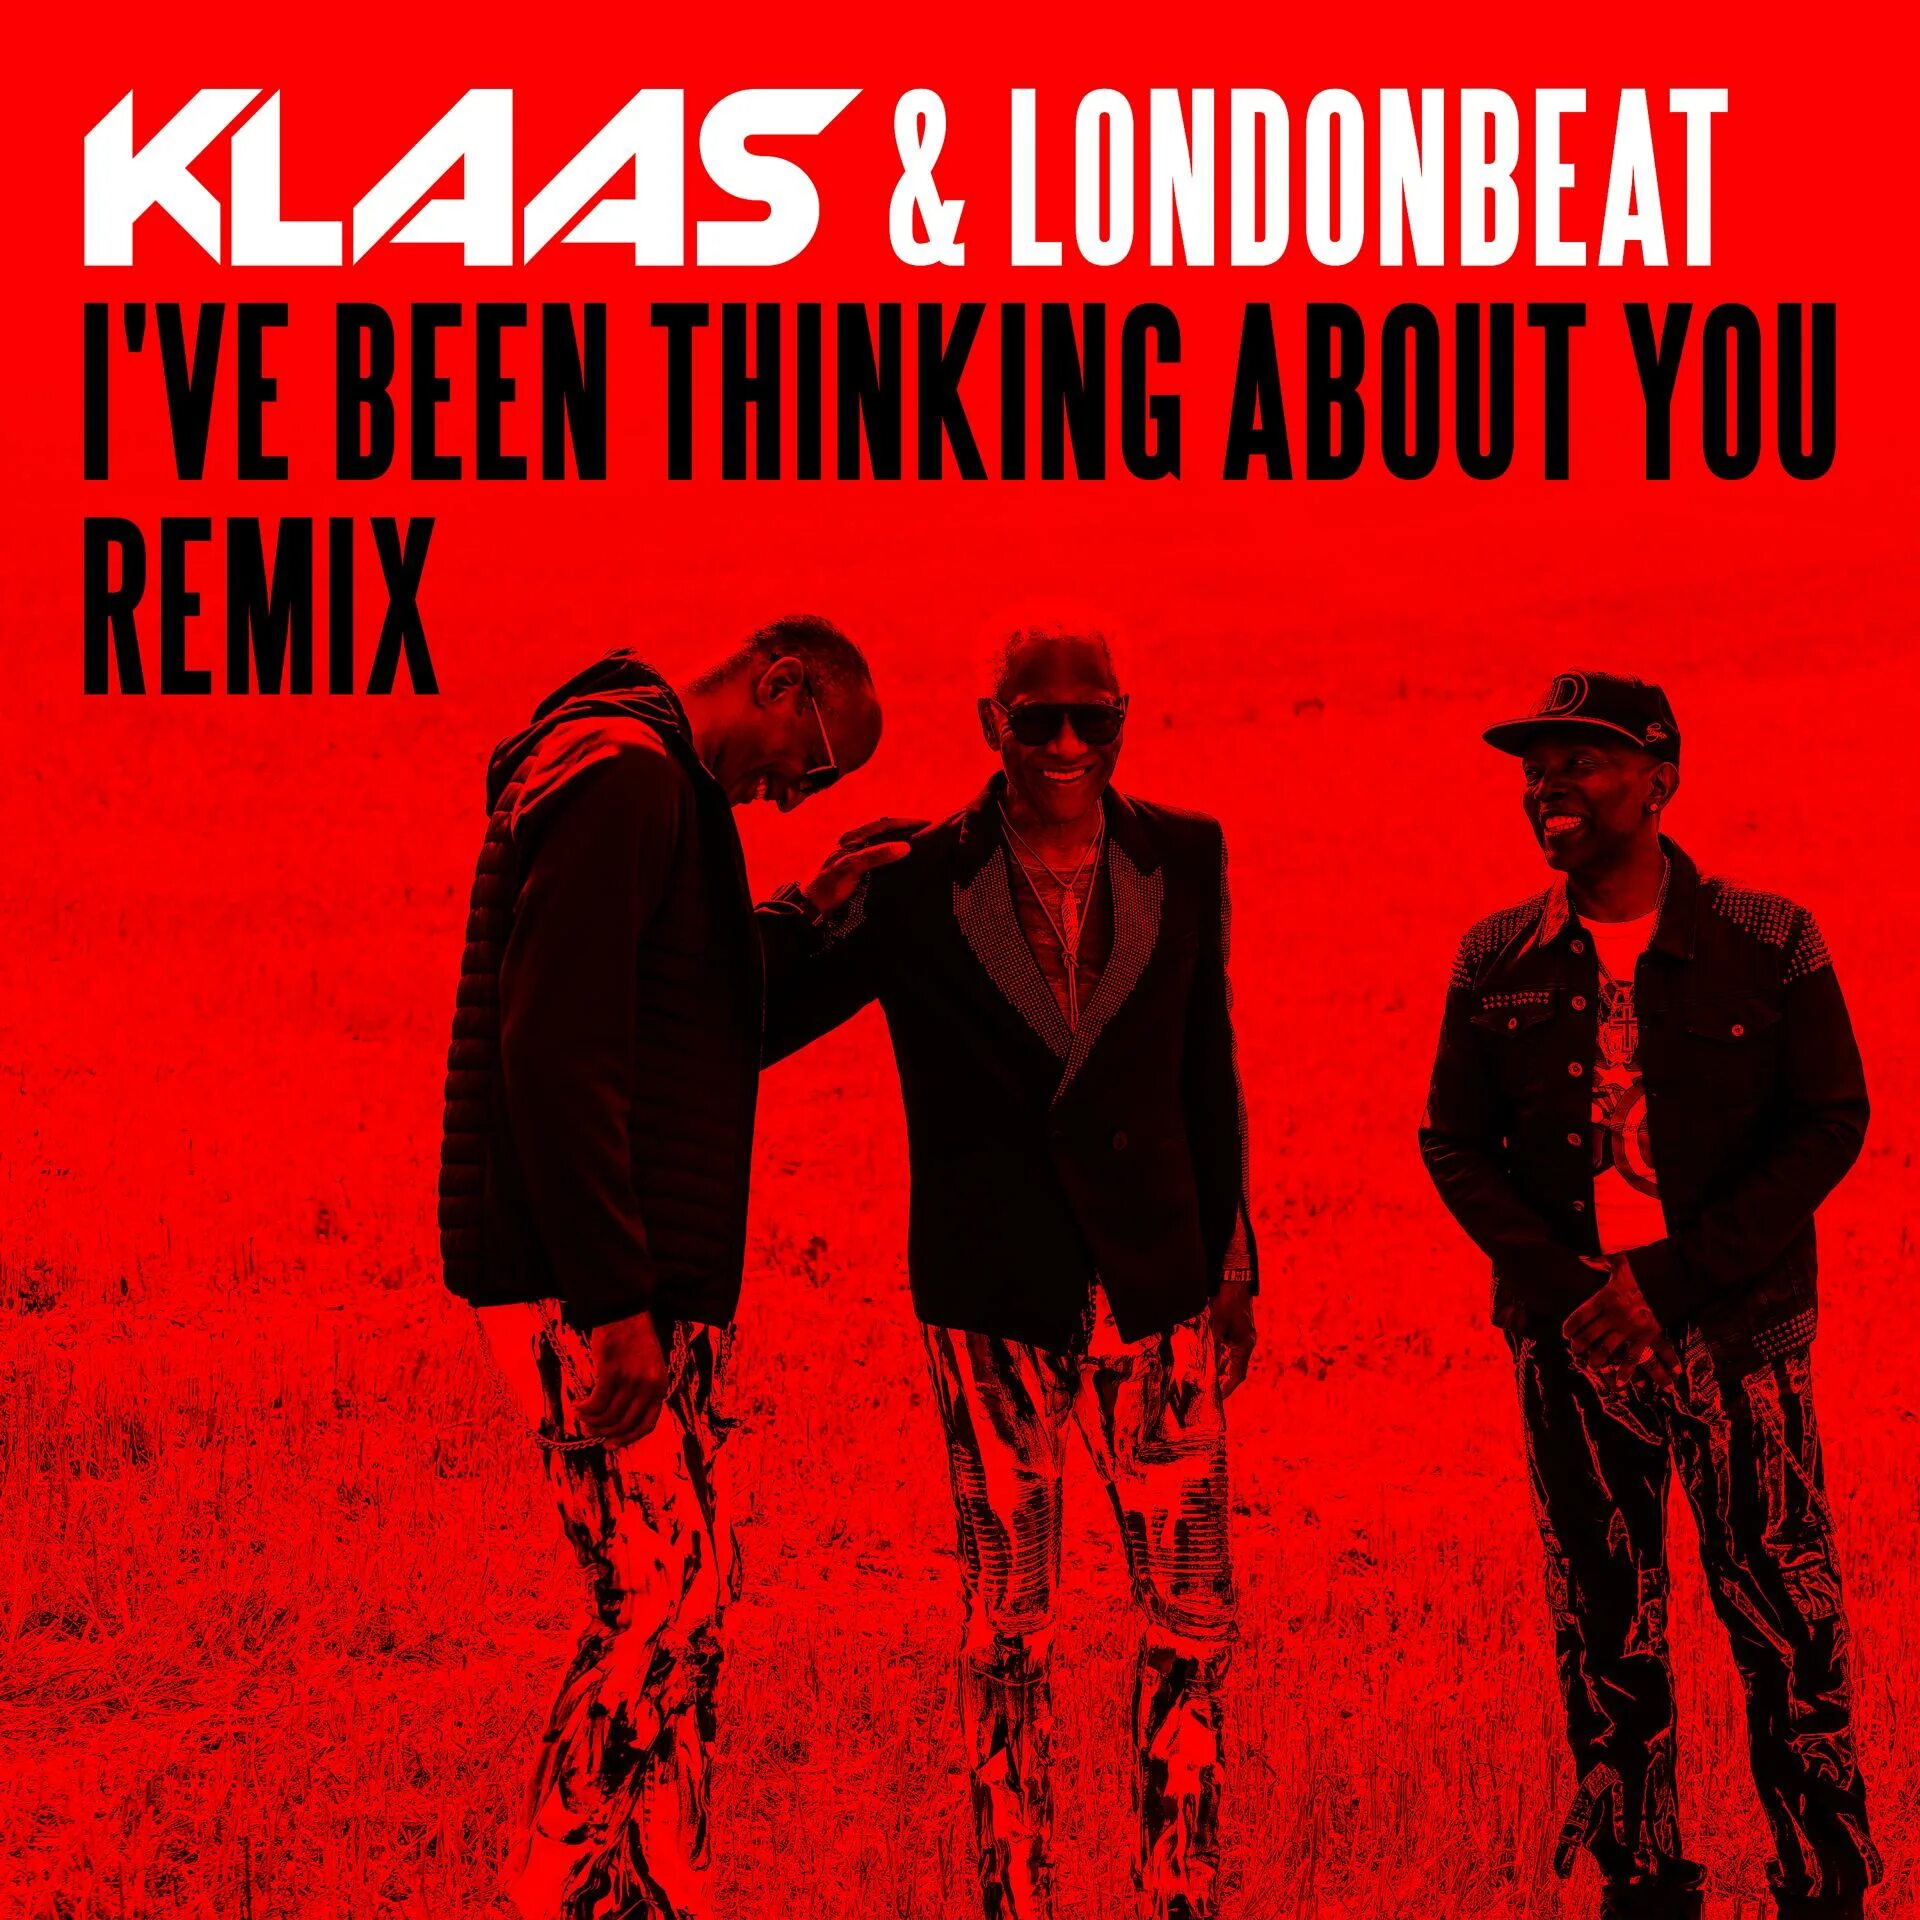 Klaas & Londonbeat - i`ve been thinking about you (Klaas Remix). London Beat ive been thinking about you. Klaas & Londonbeat - thinking about you. I've been thinking about you обложка. I ve been offered